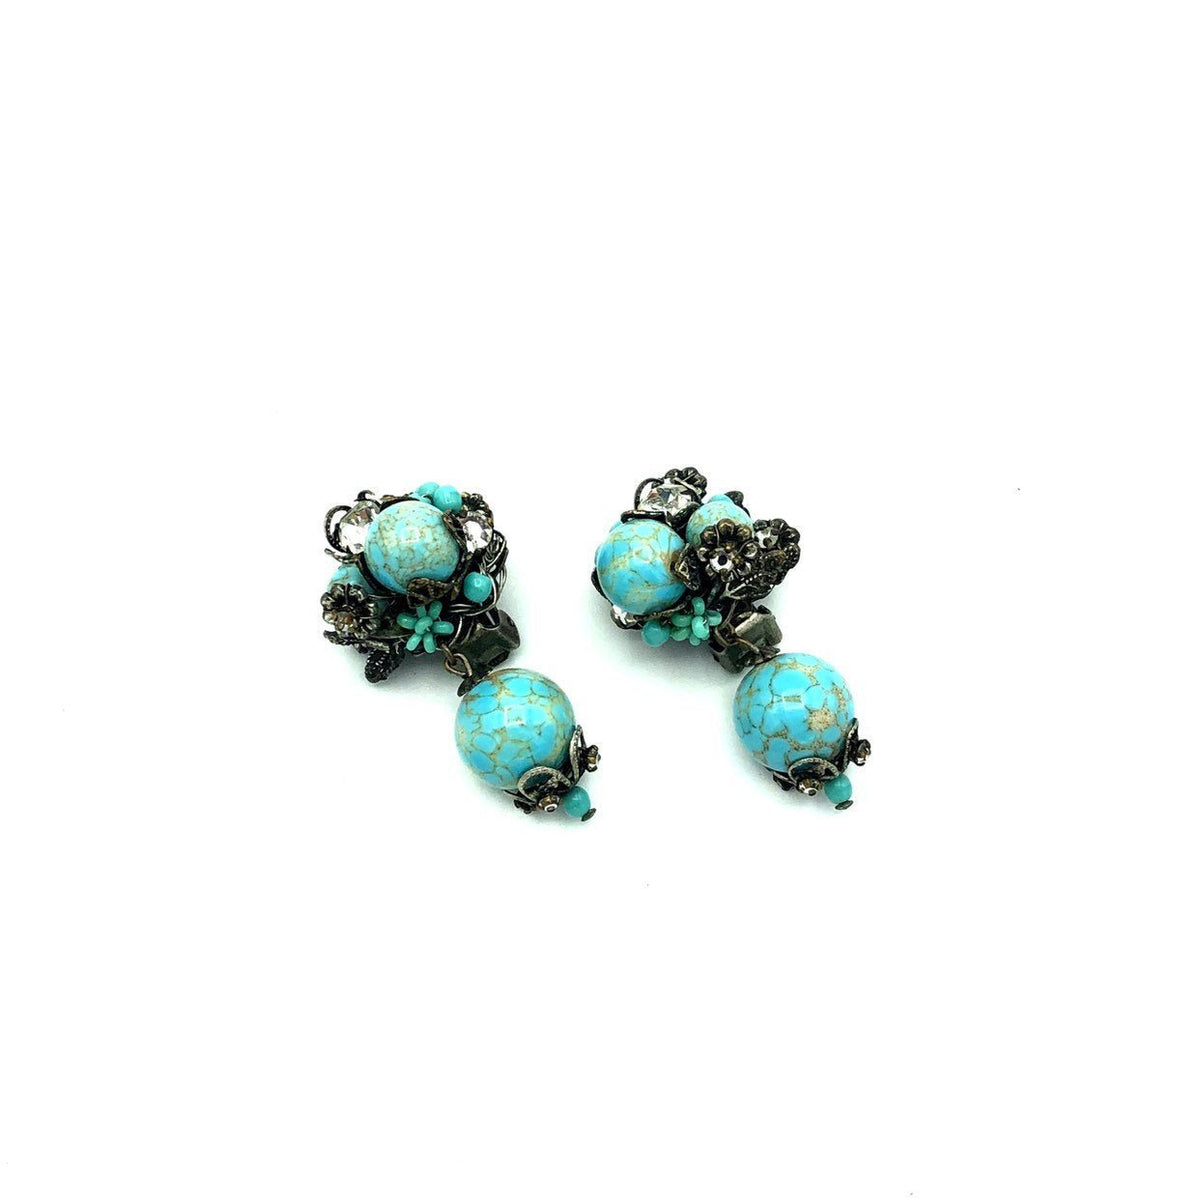 DeMario NY Blue Turquoise Rhinestone Beaded Dangle Vintage Clip-On Earrings - 24 Wishes Vintage Jewelry